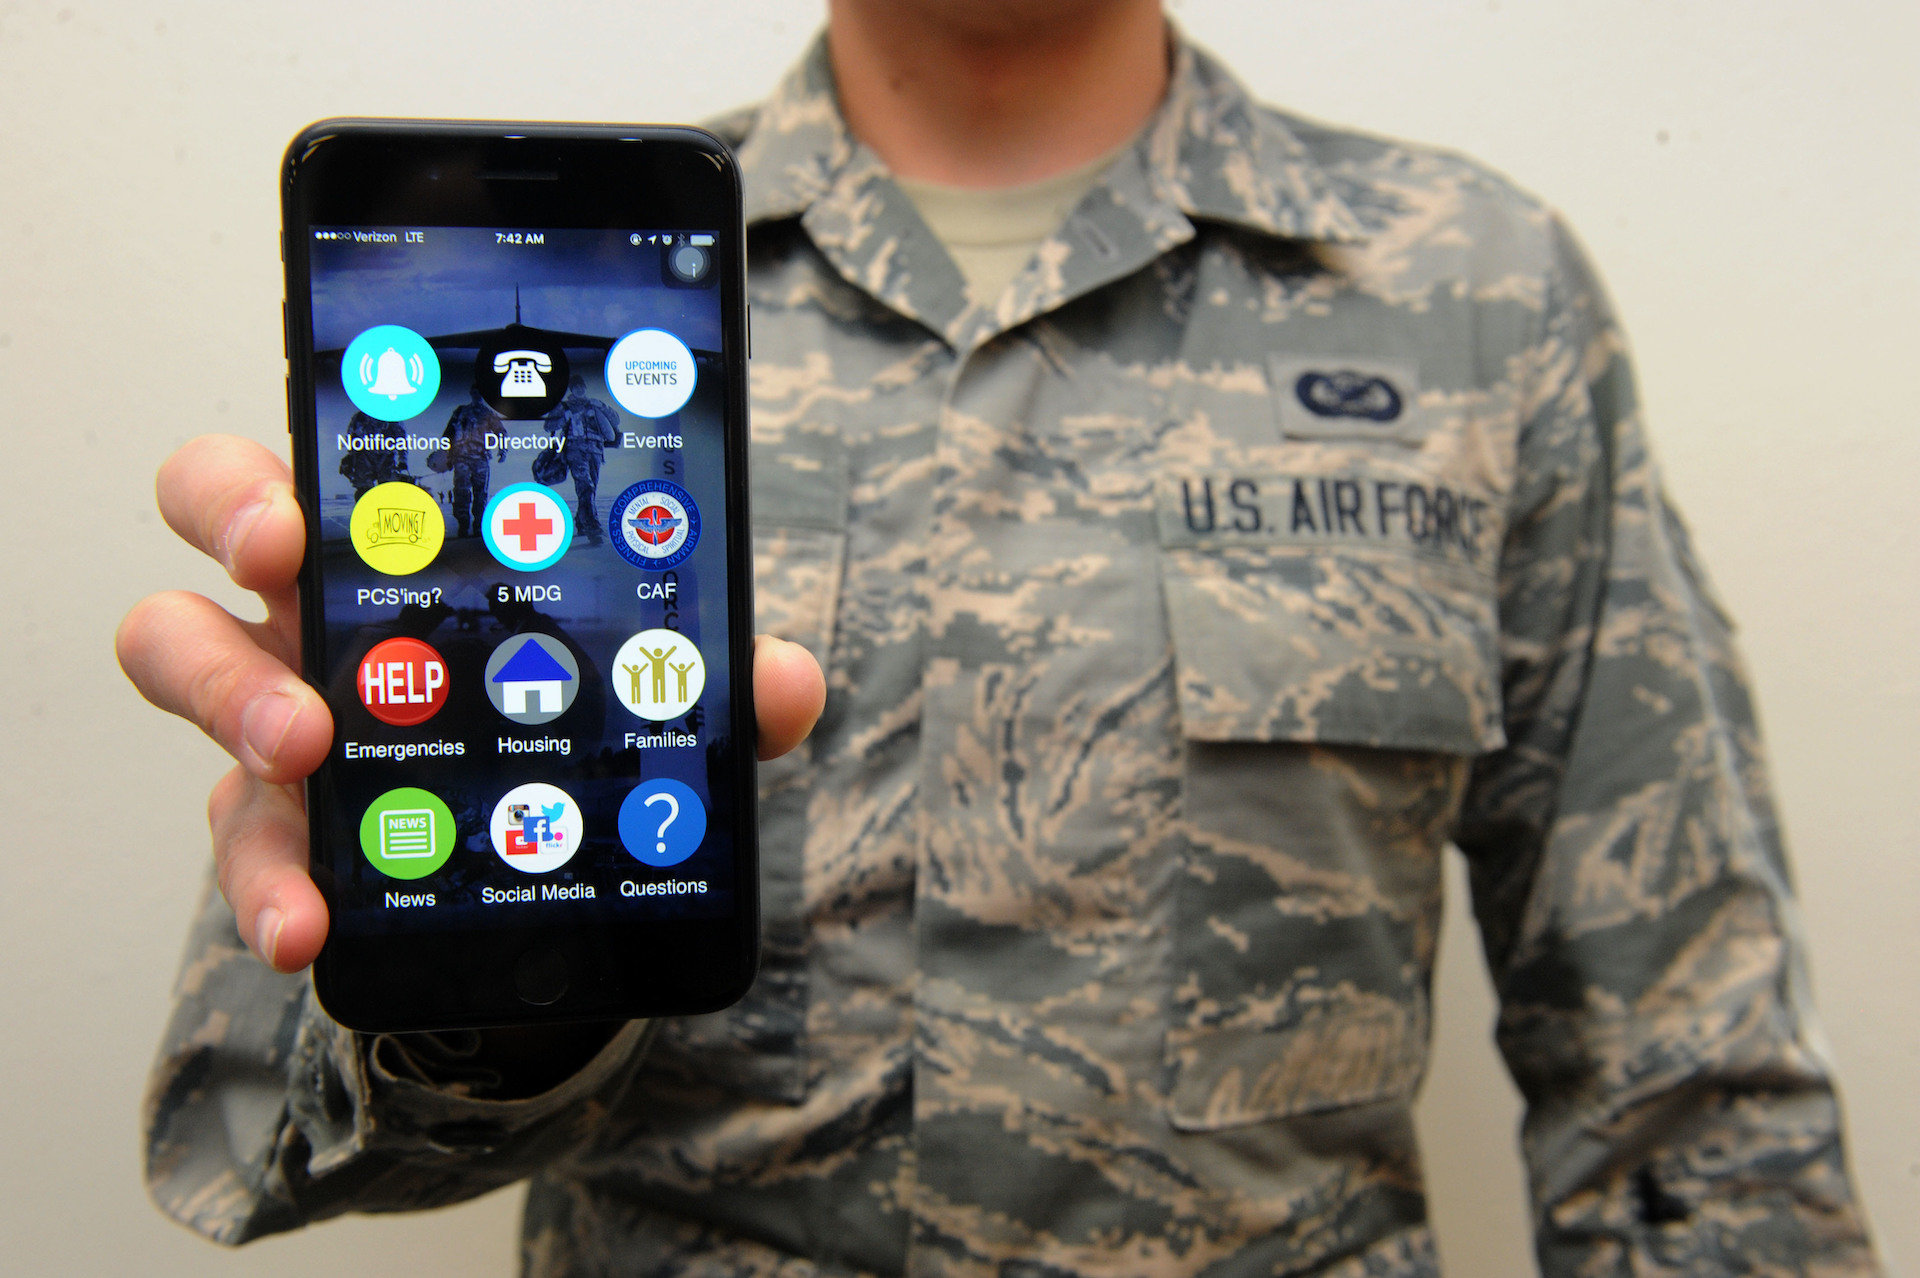 military-personnel-used-banned-apps-on-dod-issued-mobile-devices-ig